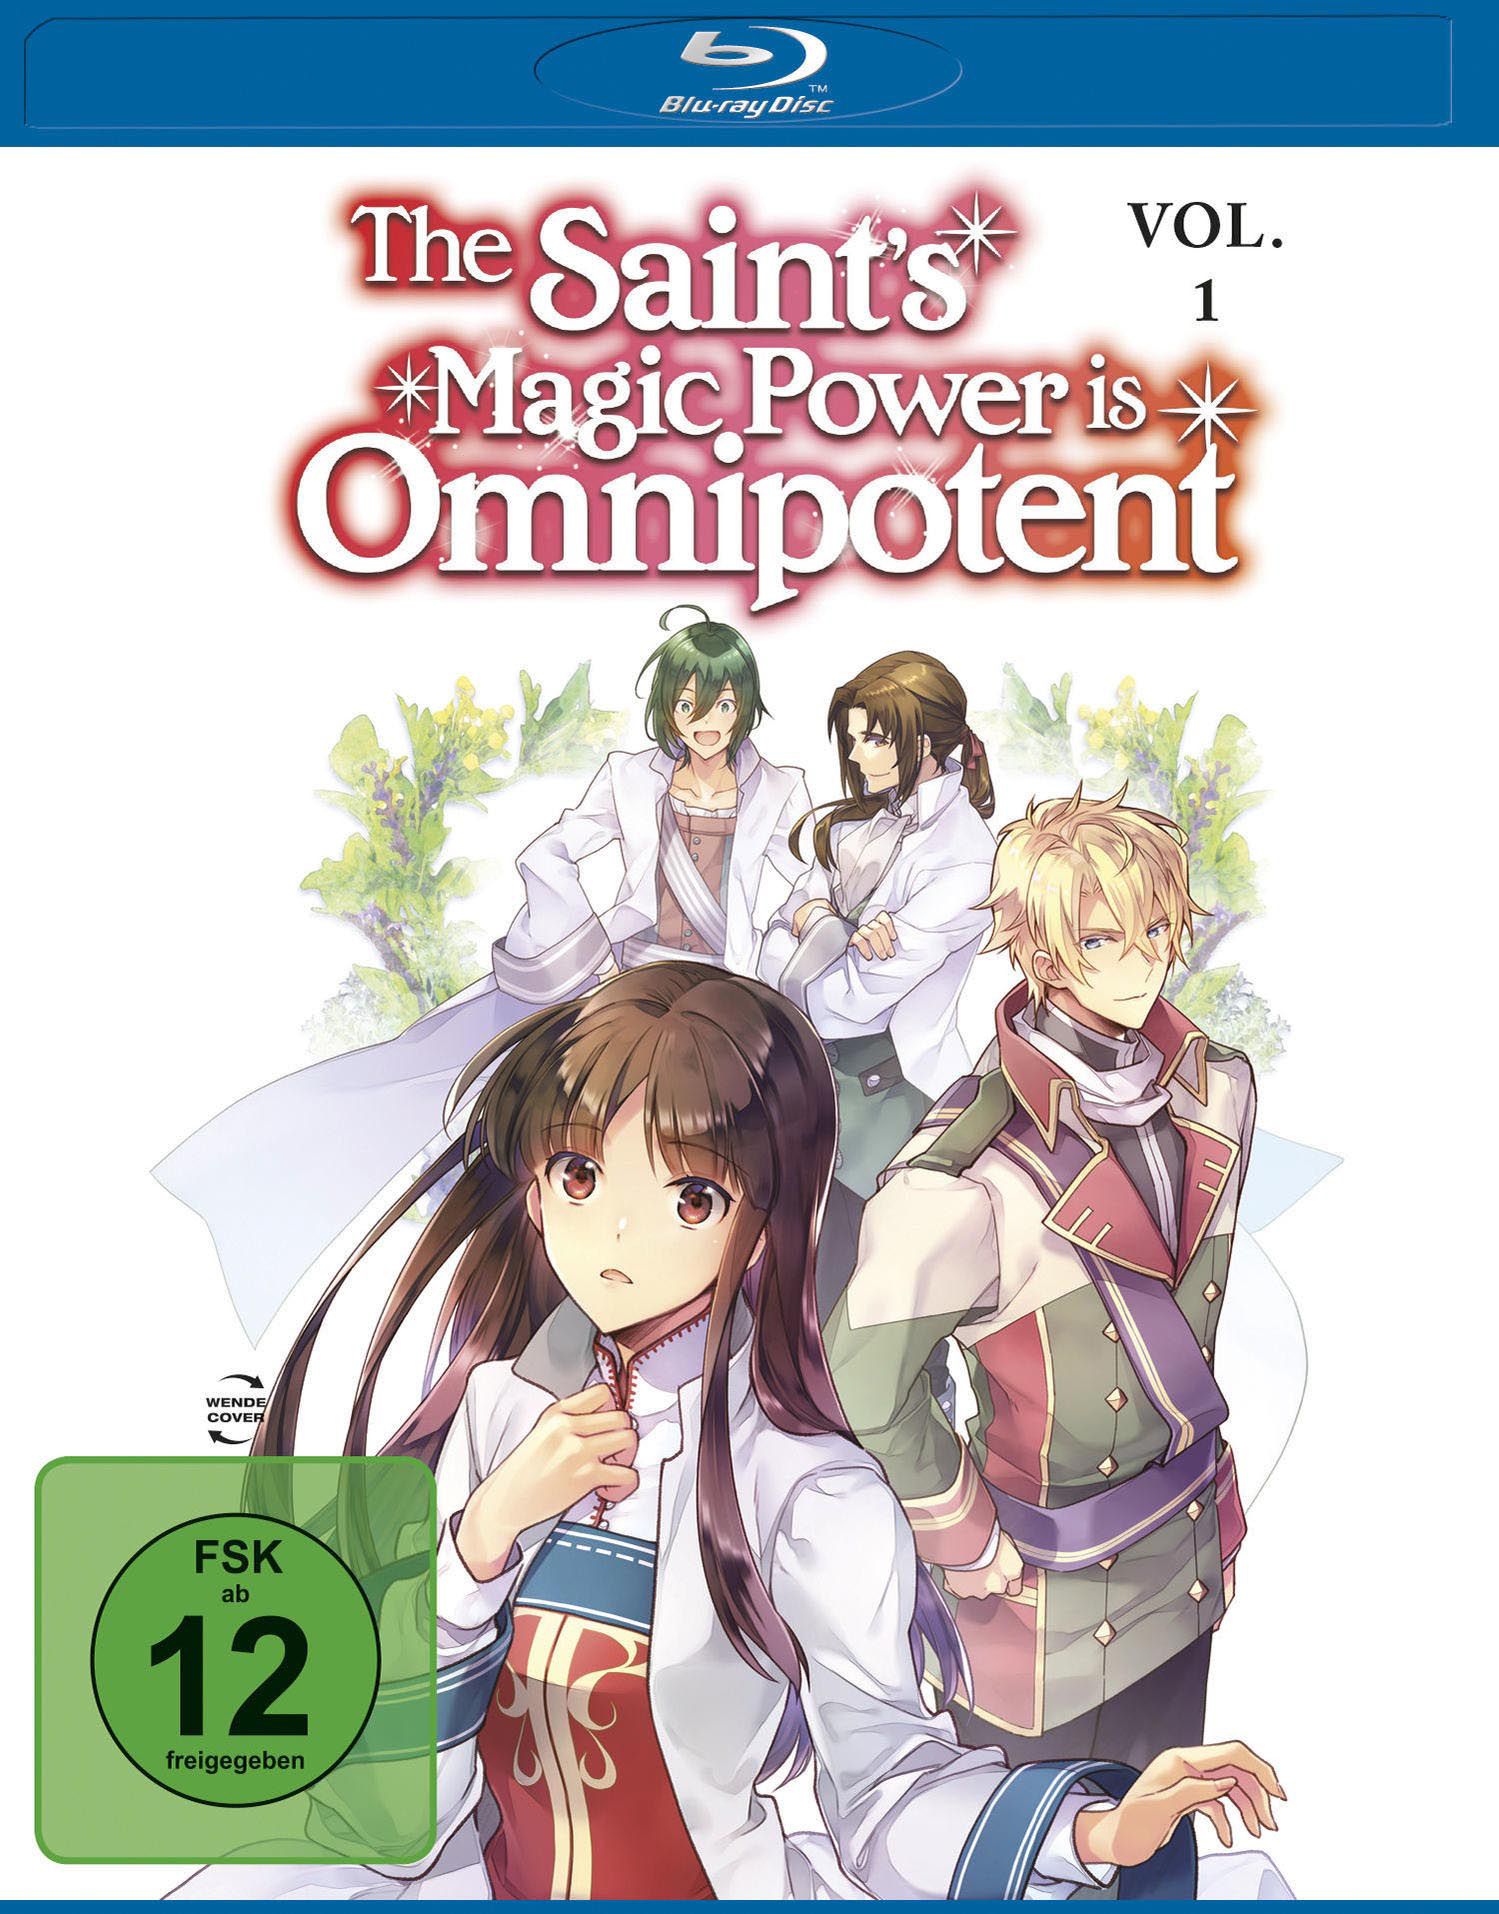 The Saint\'s Power Is Magic Vol. Omnipotent Blu-ray 1